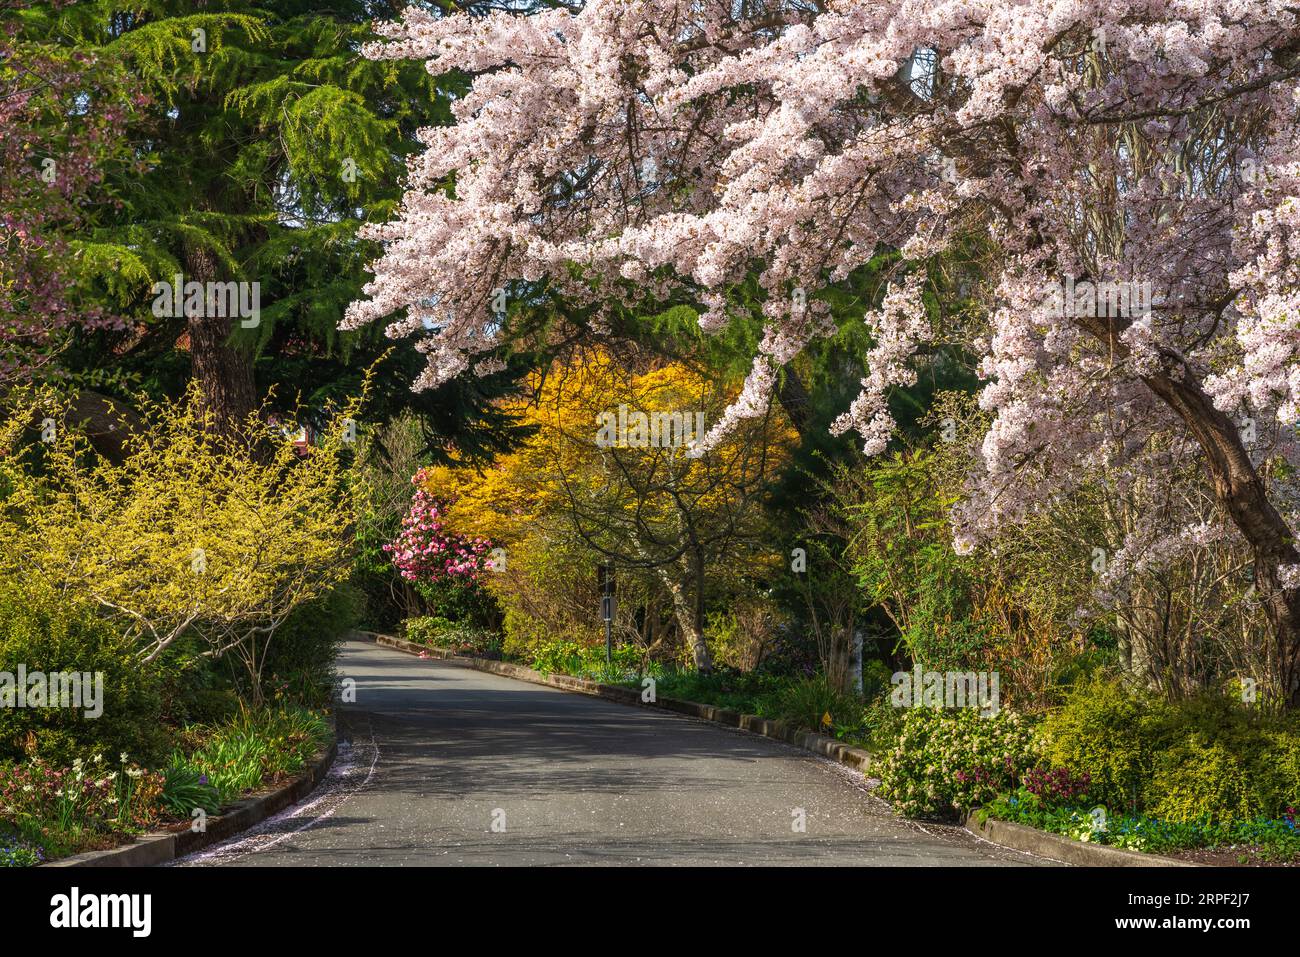 Cherry tree blossoms at the botanical gardens at Government House in Victoria, Vancouver Island, British Columbia, Canada. Stock Photo